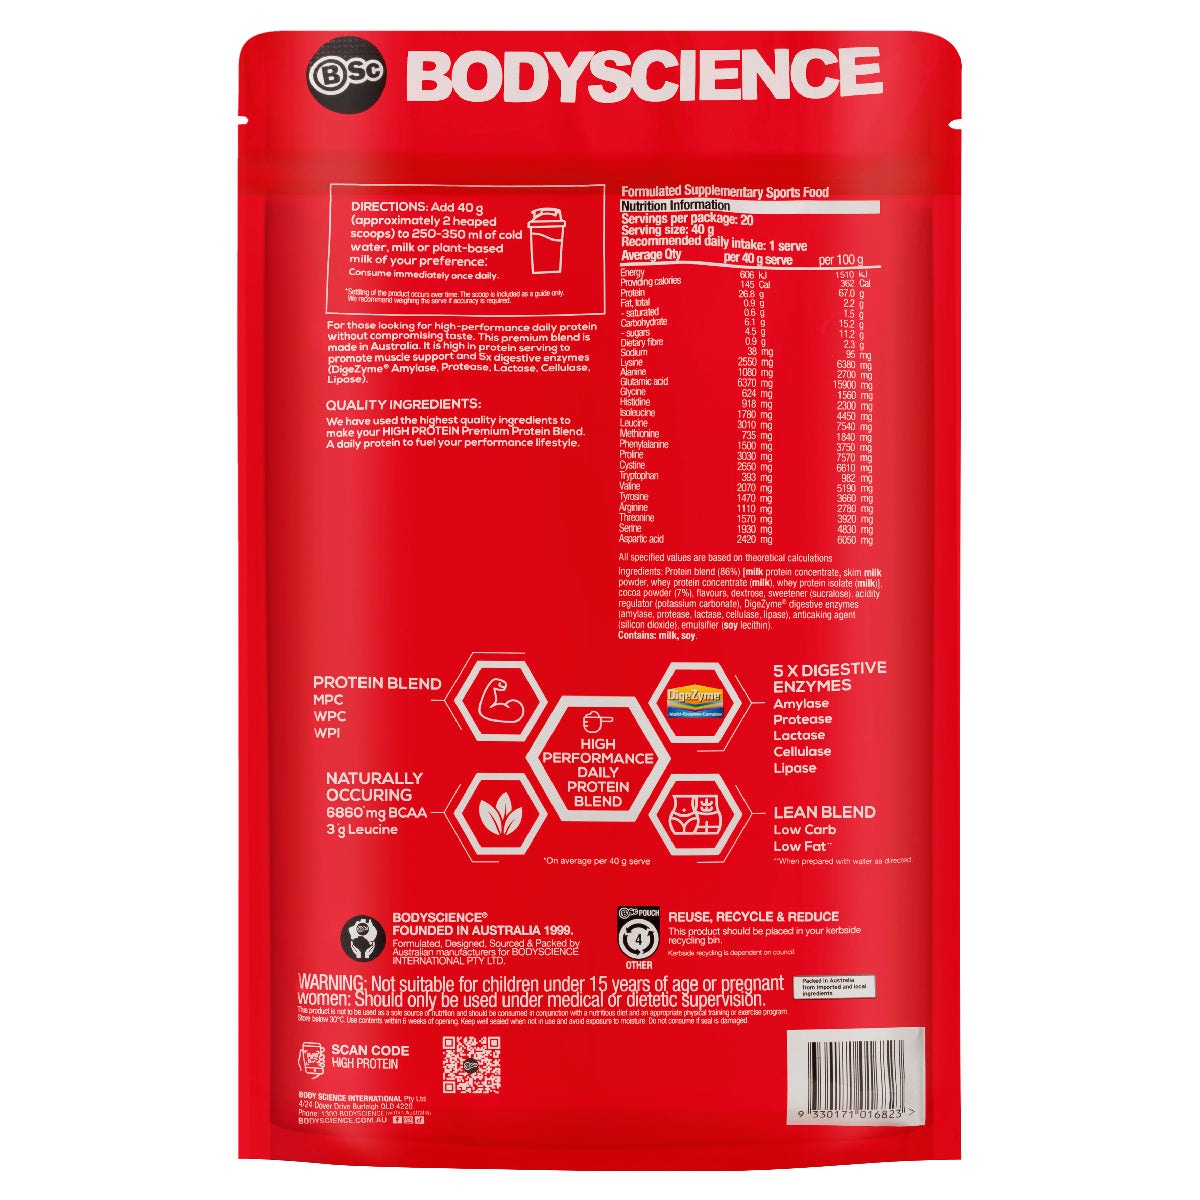 BSc Body Science High Protein Powder Chocolate 800g